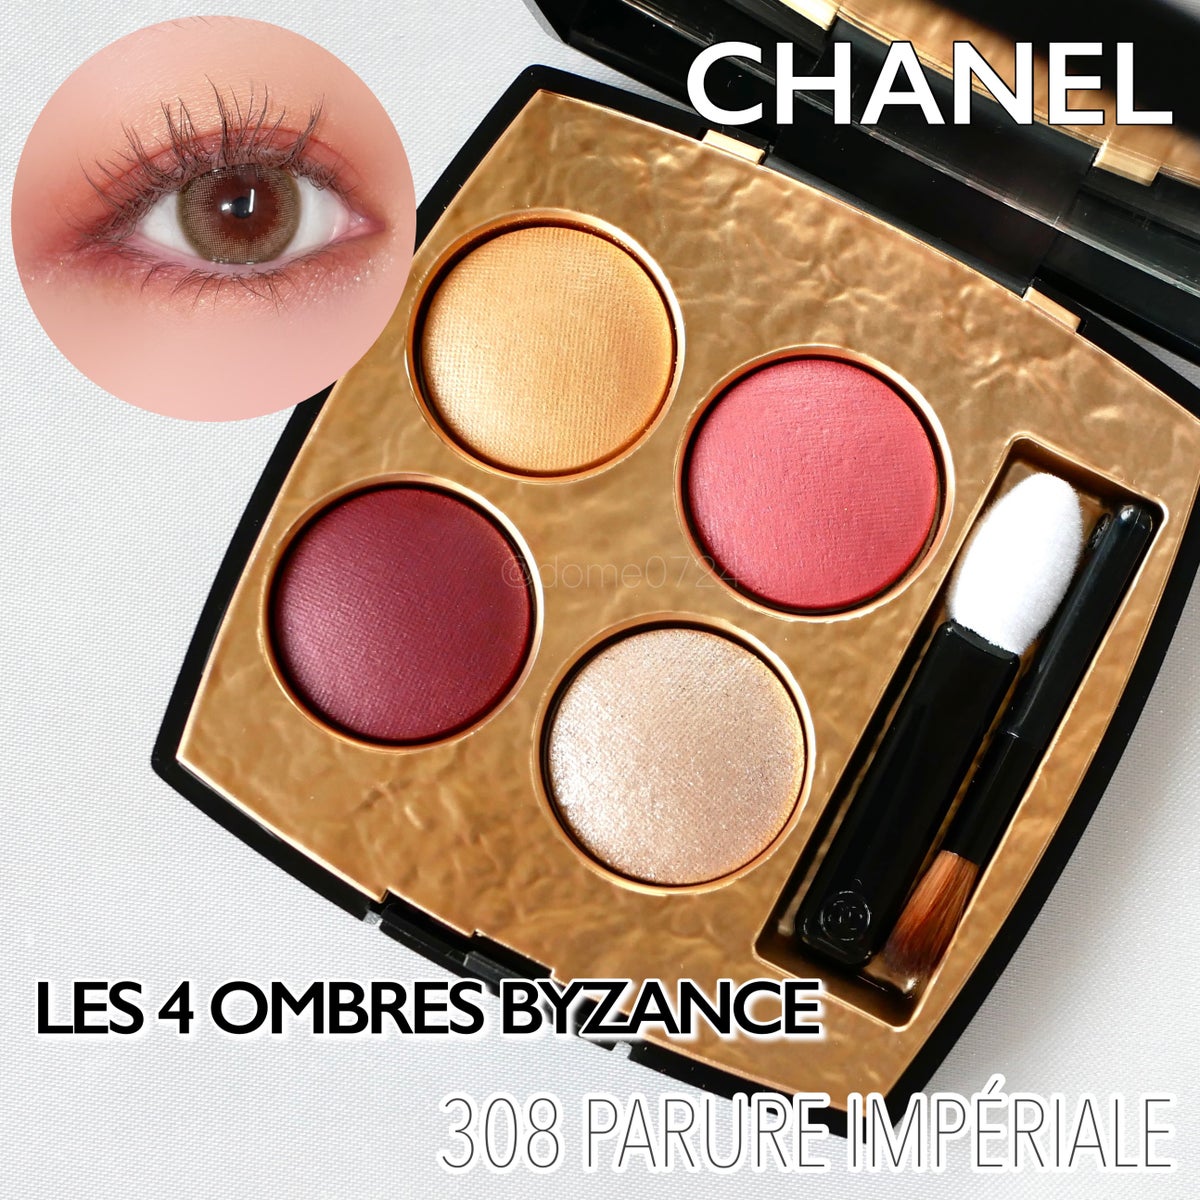 CHANEL Les 4 Ombres Byzance #308 Parure Imperiale 